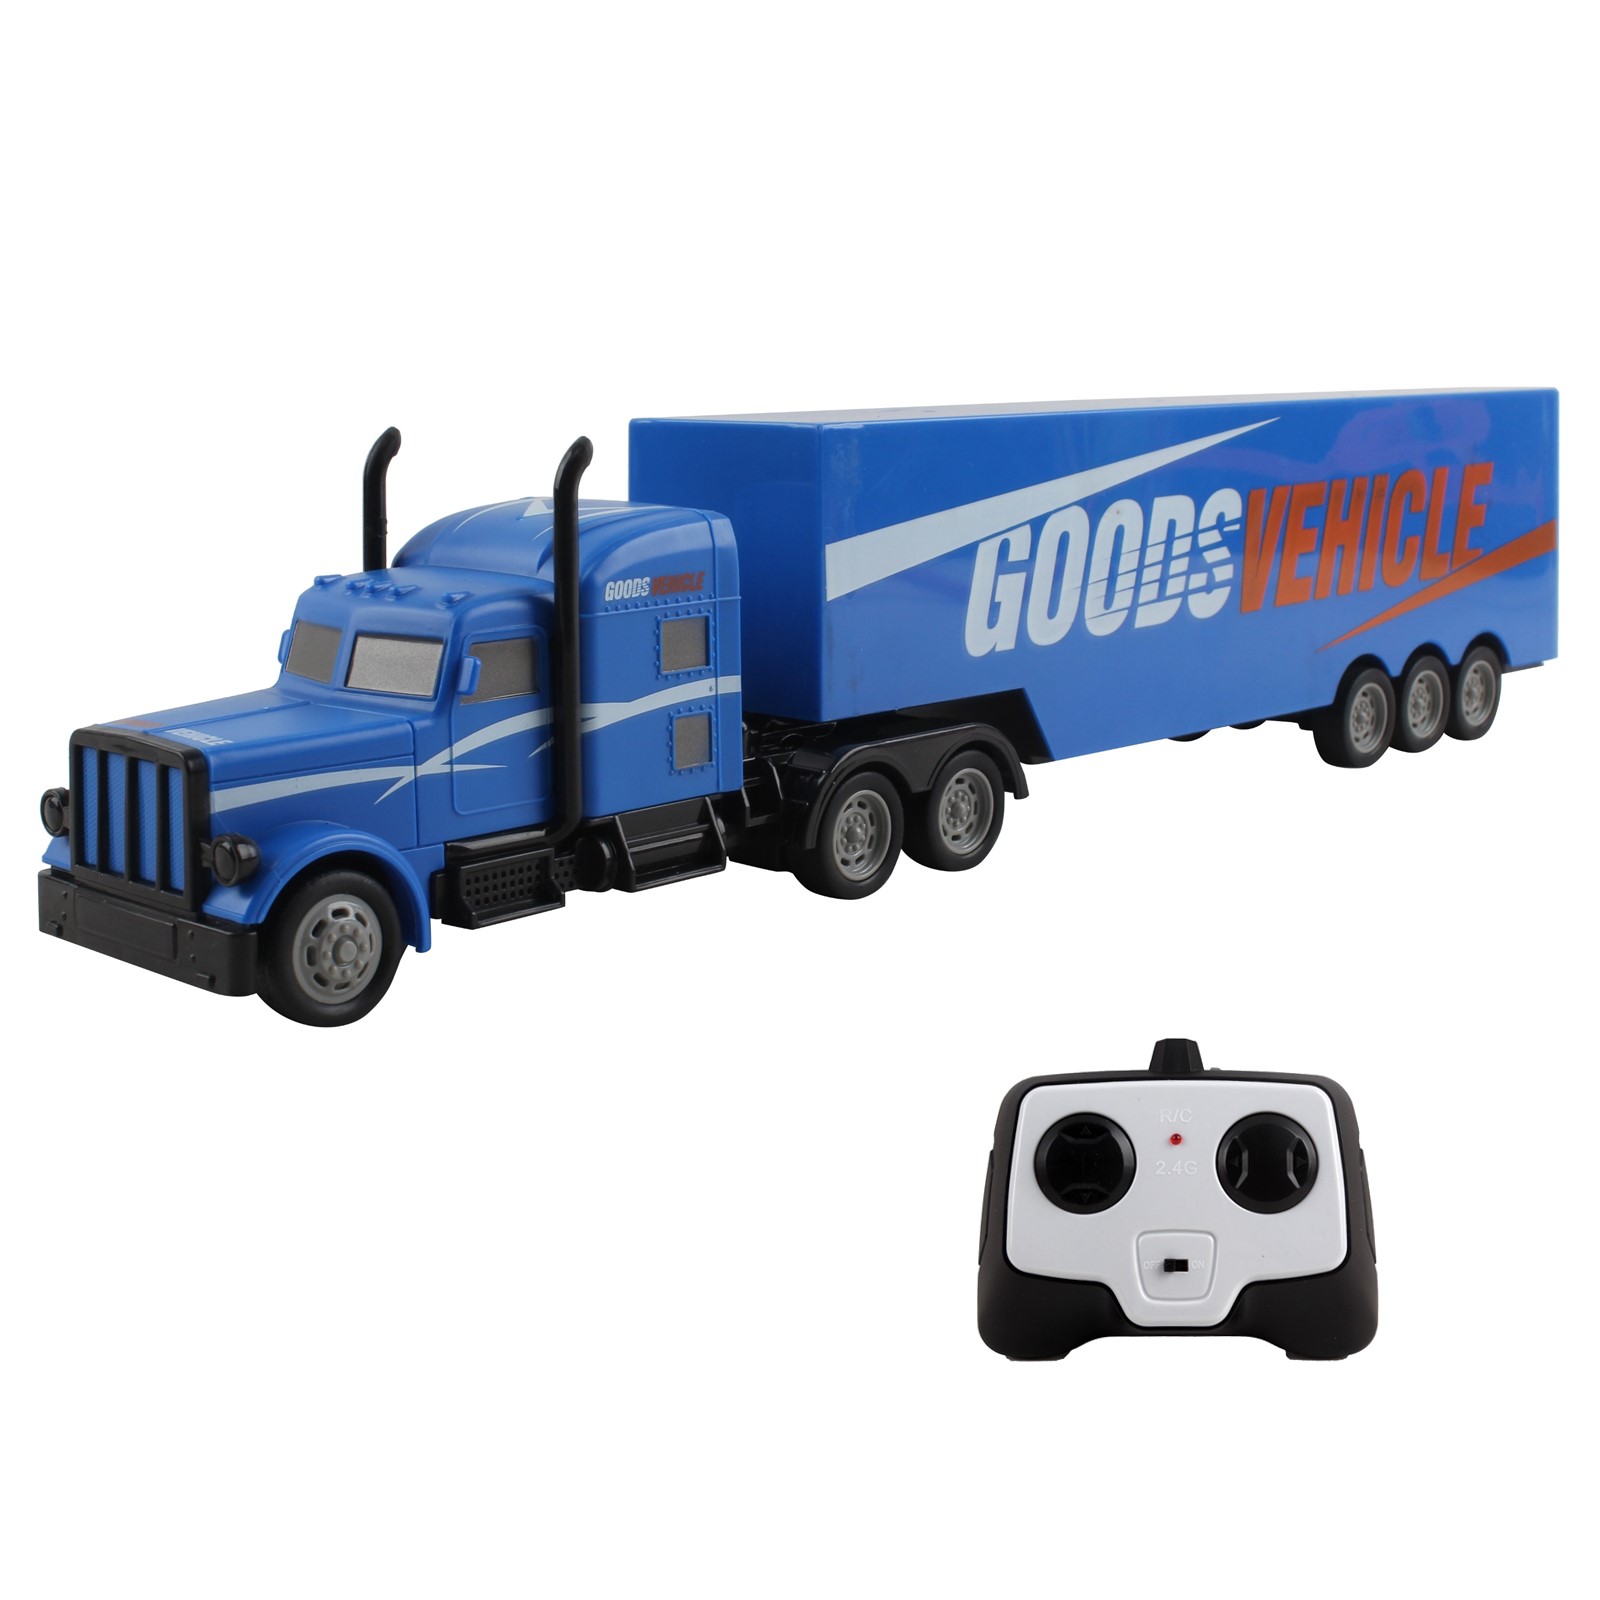 Vokodo RC Semi Truck And Trailer 18 Inch 2.4Ghz Fast Speed 1:16 Scale Electric Hauler Rechargeable Battery Included Remote Control Car Kids Big Rig Toy Vehicle Great Gift For Children Boys Girl (Blue)